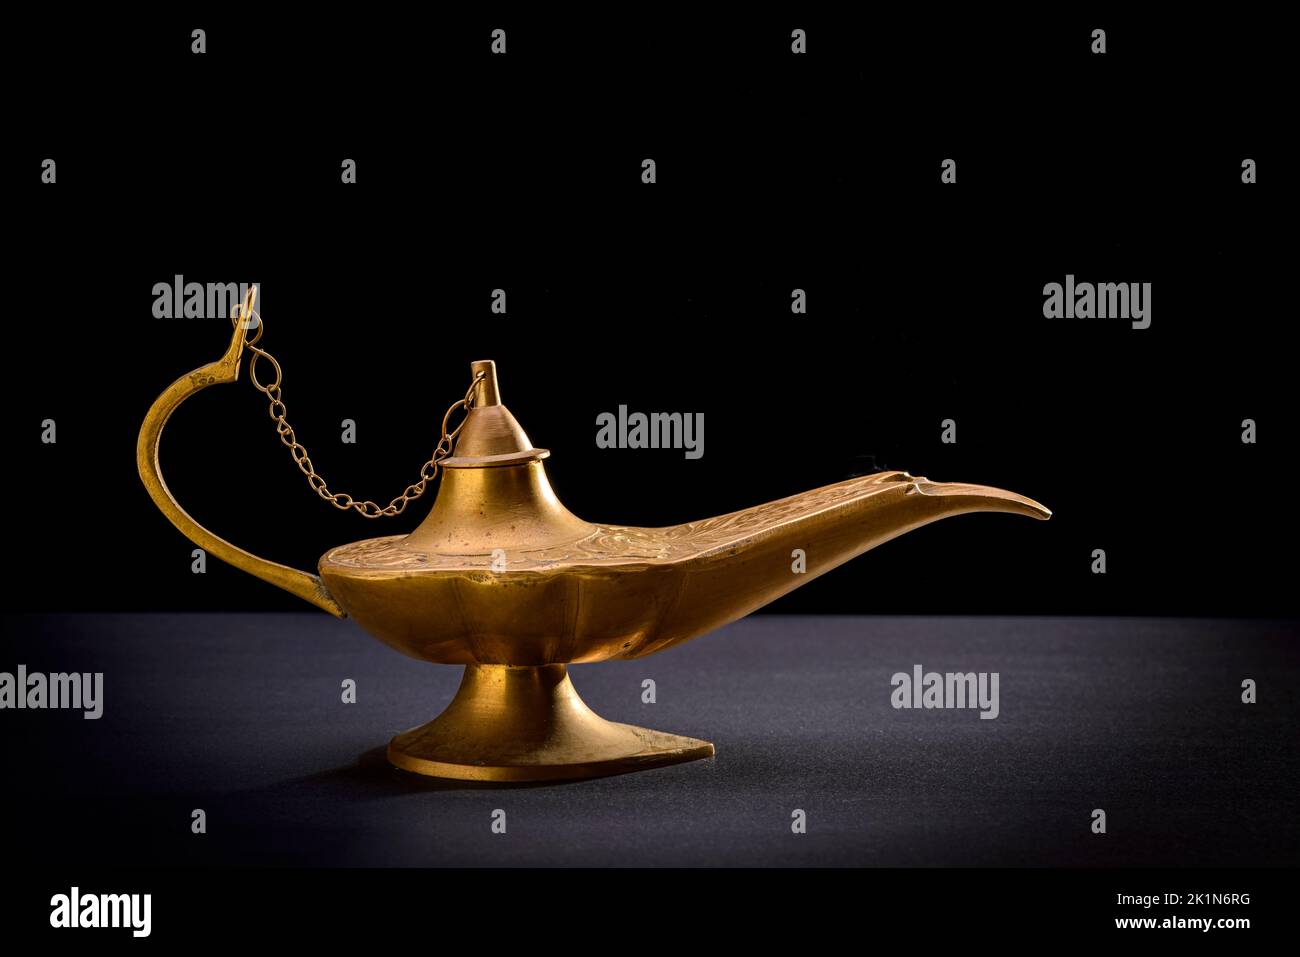 700 Aladin Genie Oil Brass Images, Stock Photos, 3D objects